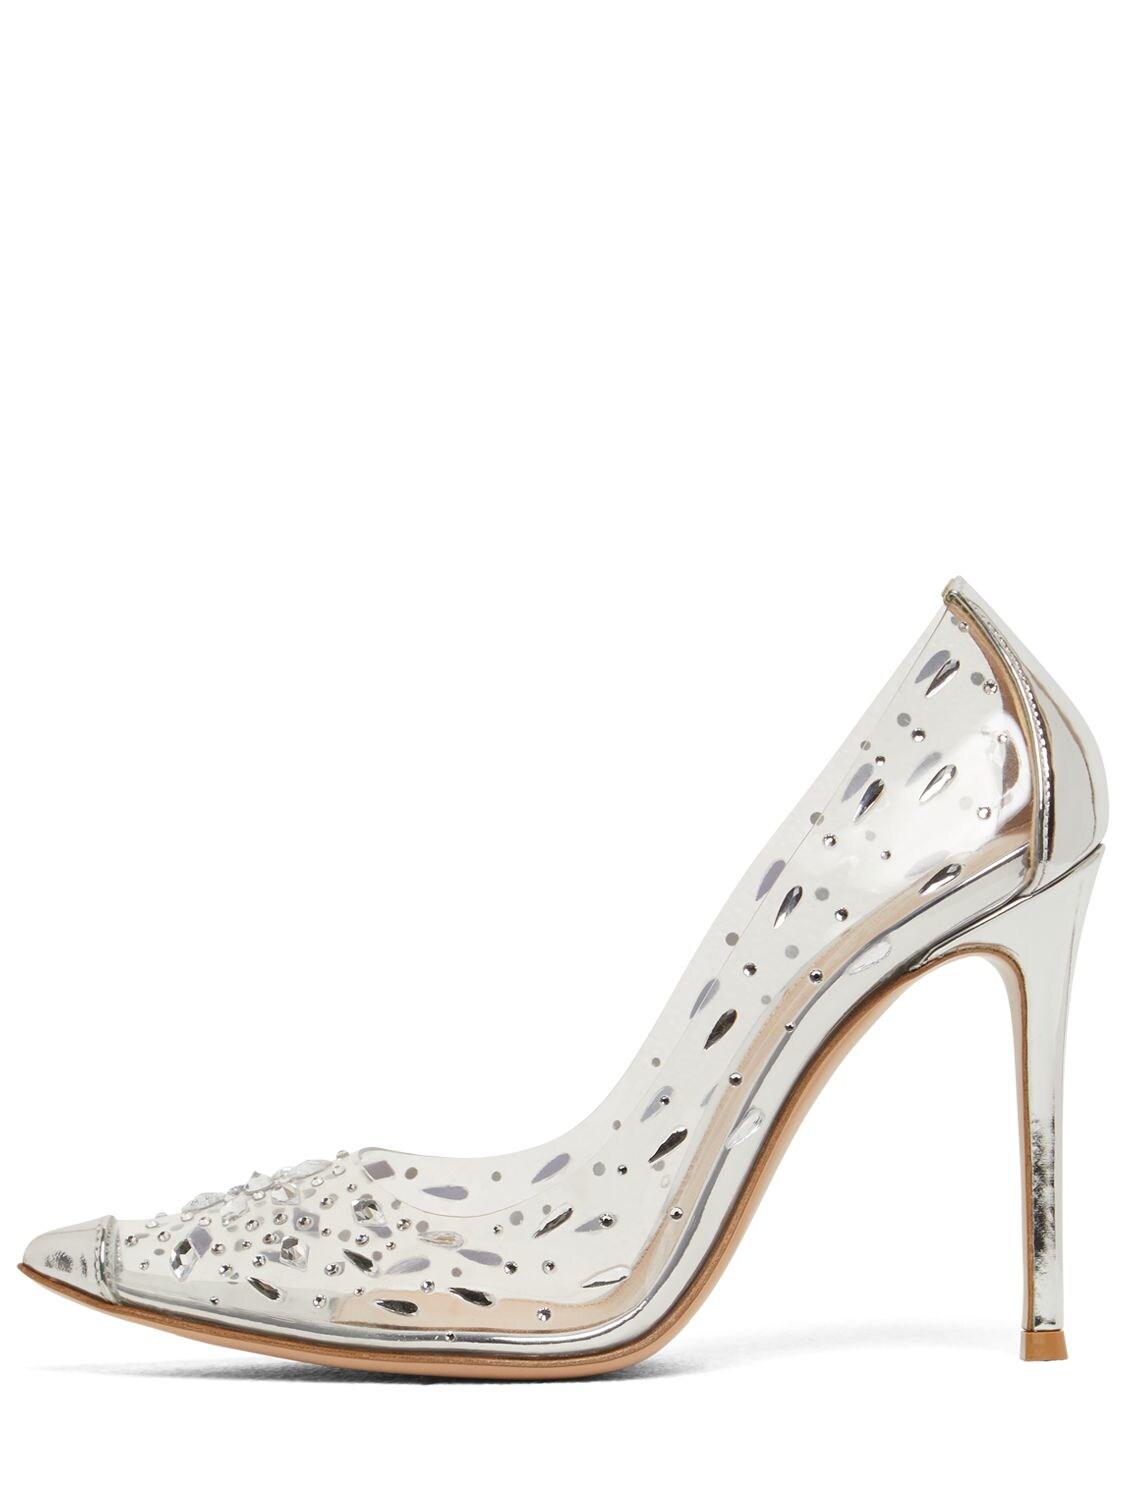 Gianvito Rossi 105mm Plexi And Metallic Leather Pumps in Natural | Lyst